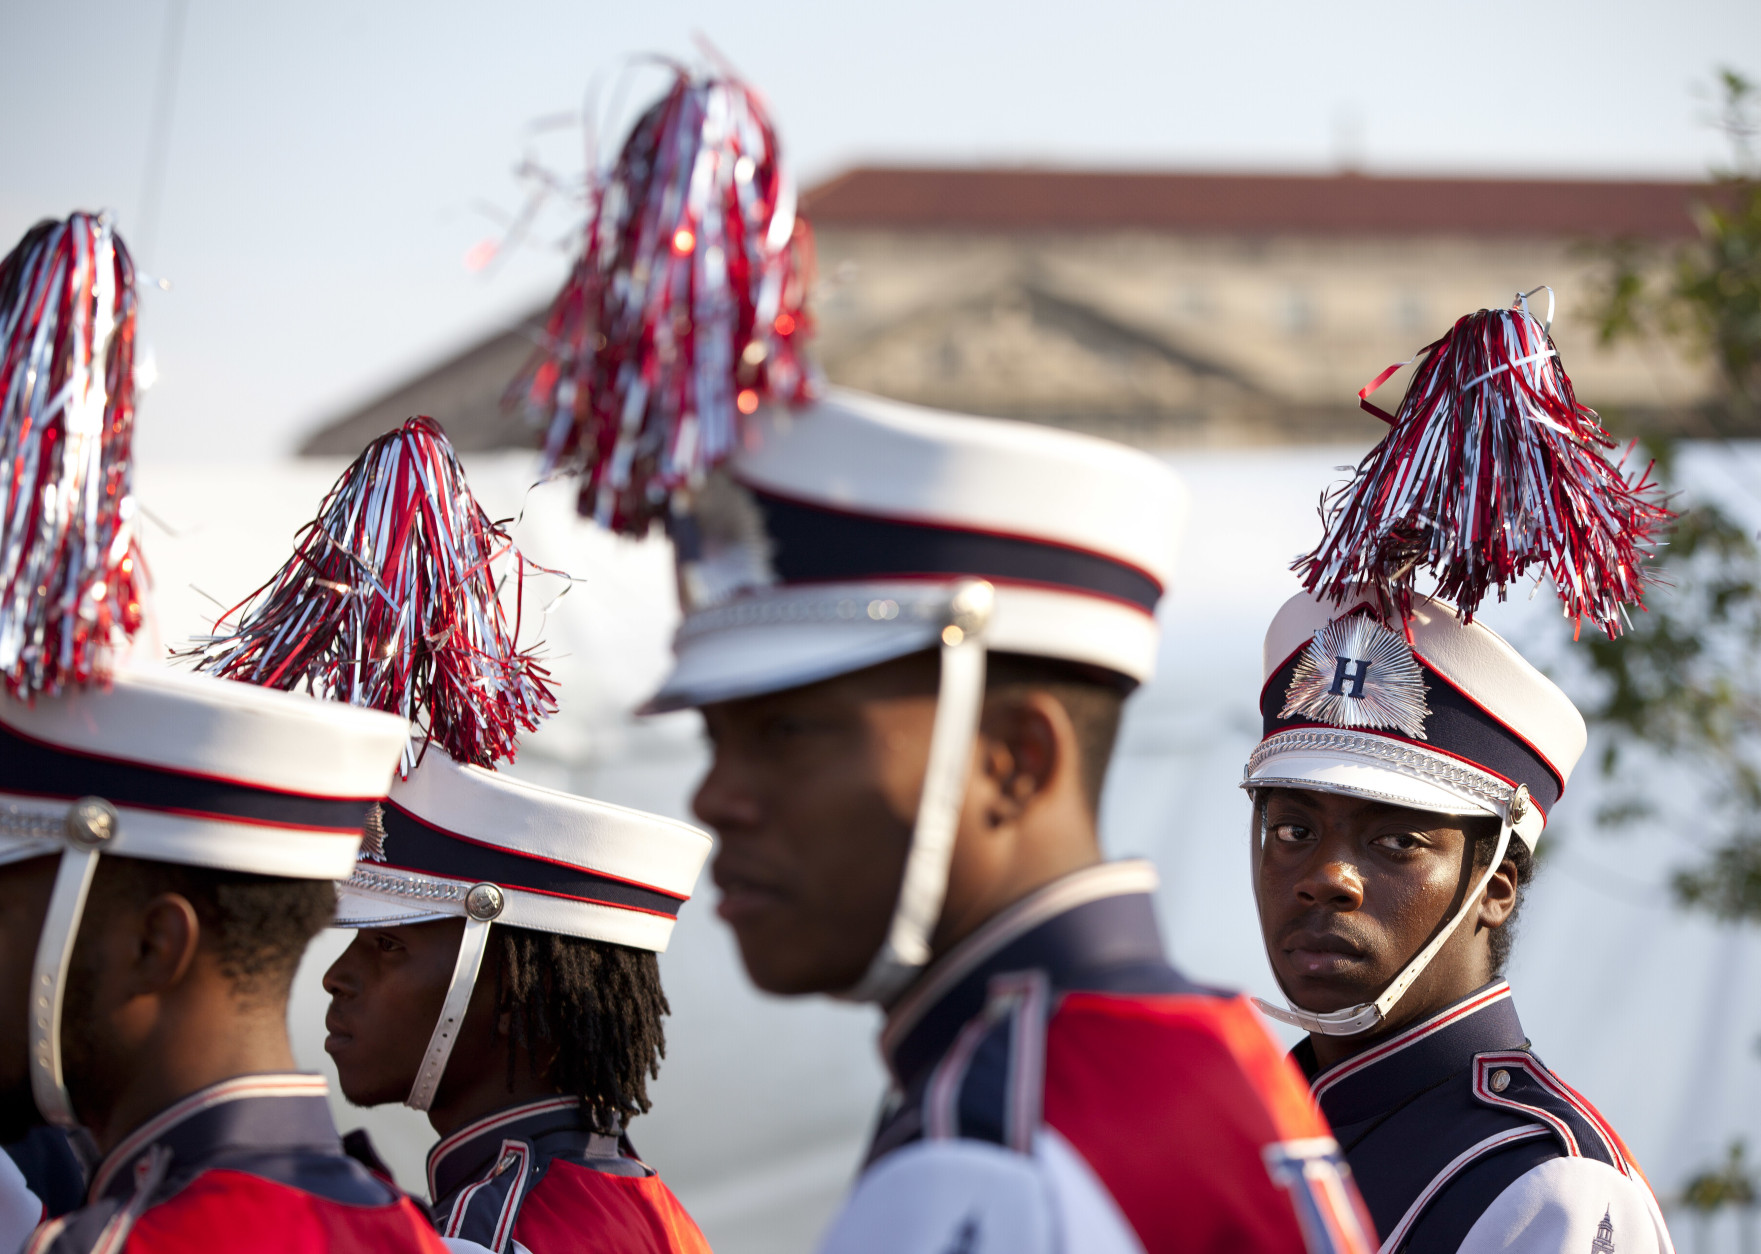 Members of Howard University's Marching Band arrive for the dedication ceremony of the Smithsonian Museum of African American History and Culture on the National Mall in Washington, Saturday, Sept. 24, 2016. (AP Photo/Pablo Martinez Monsivais)